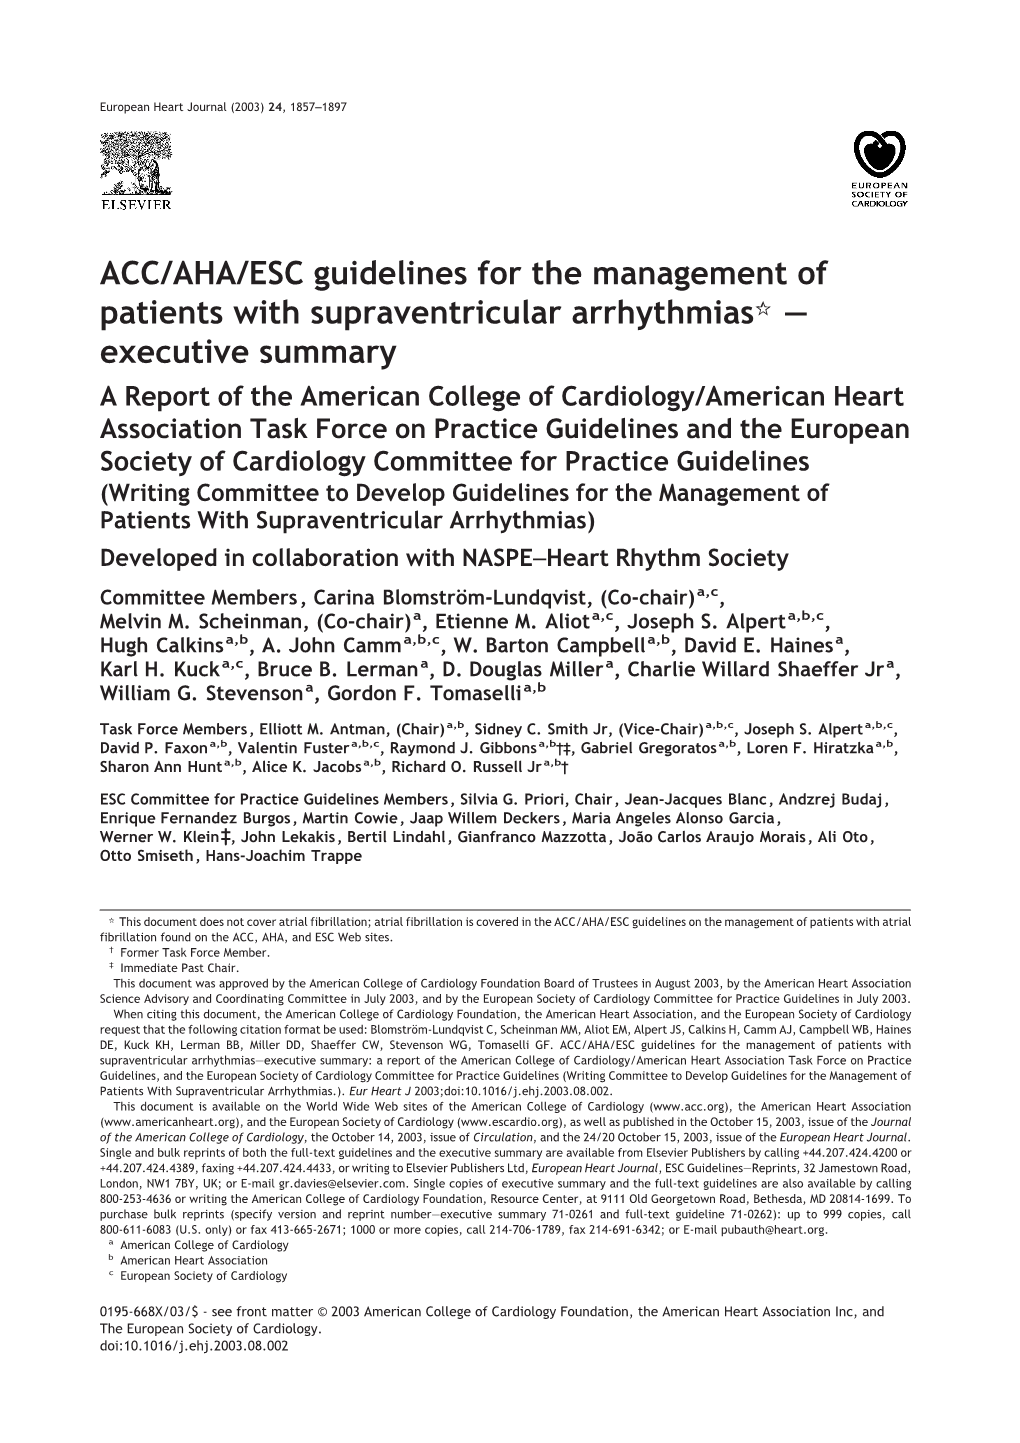 ACC/AHA/ESC Guidelines for the Management of Patients with Supraventricular Arrhythmiasm — Executive Summary